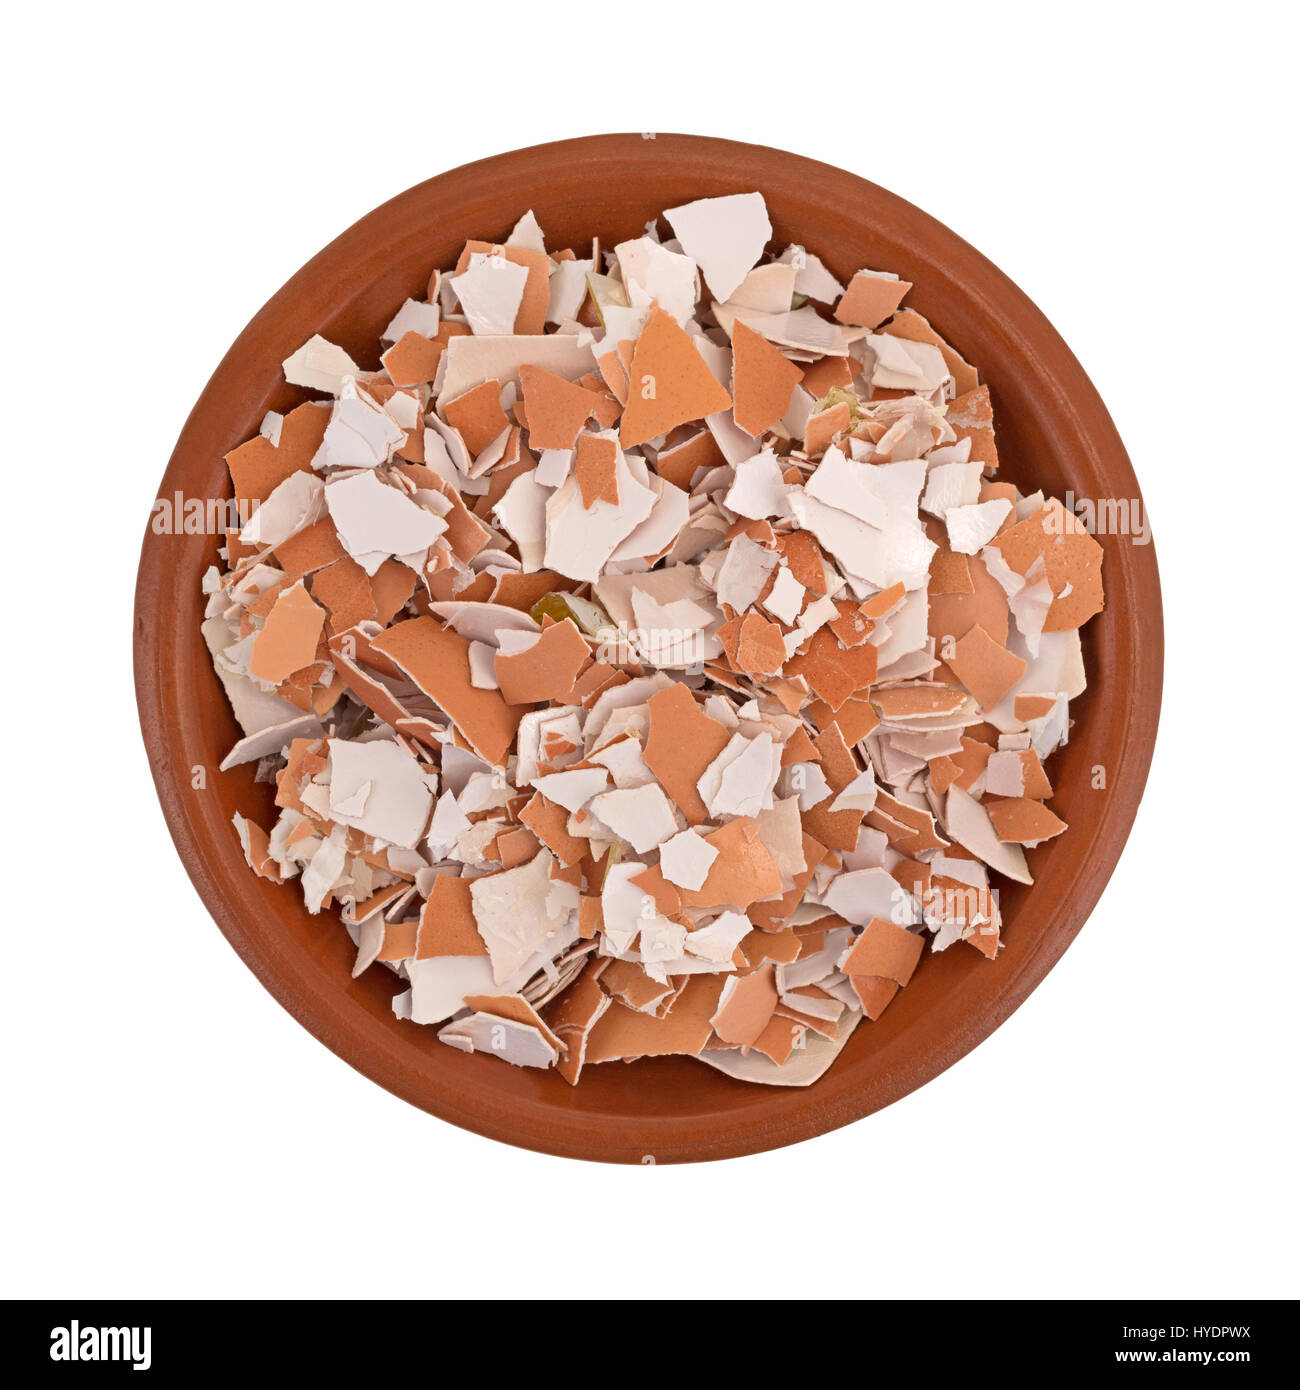 Top view of a small bowl filled with crushed egg shells isolated on a white background. Stock Photo